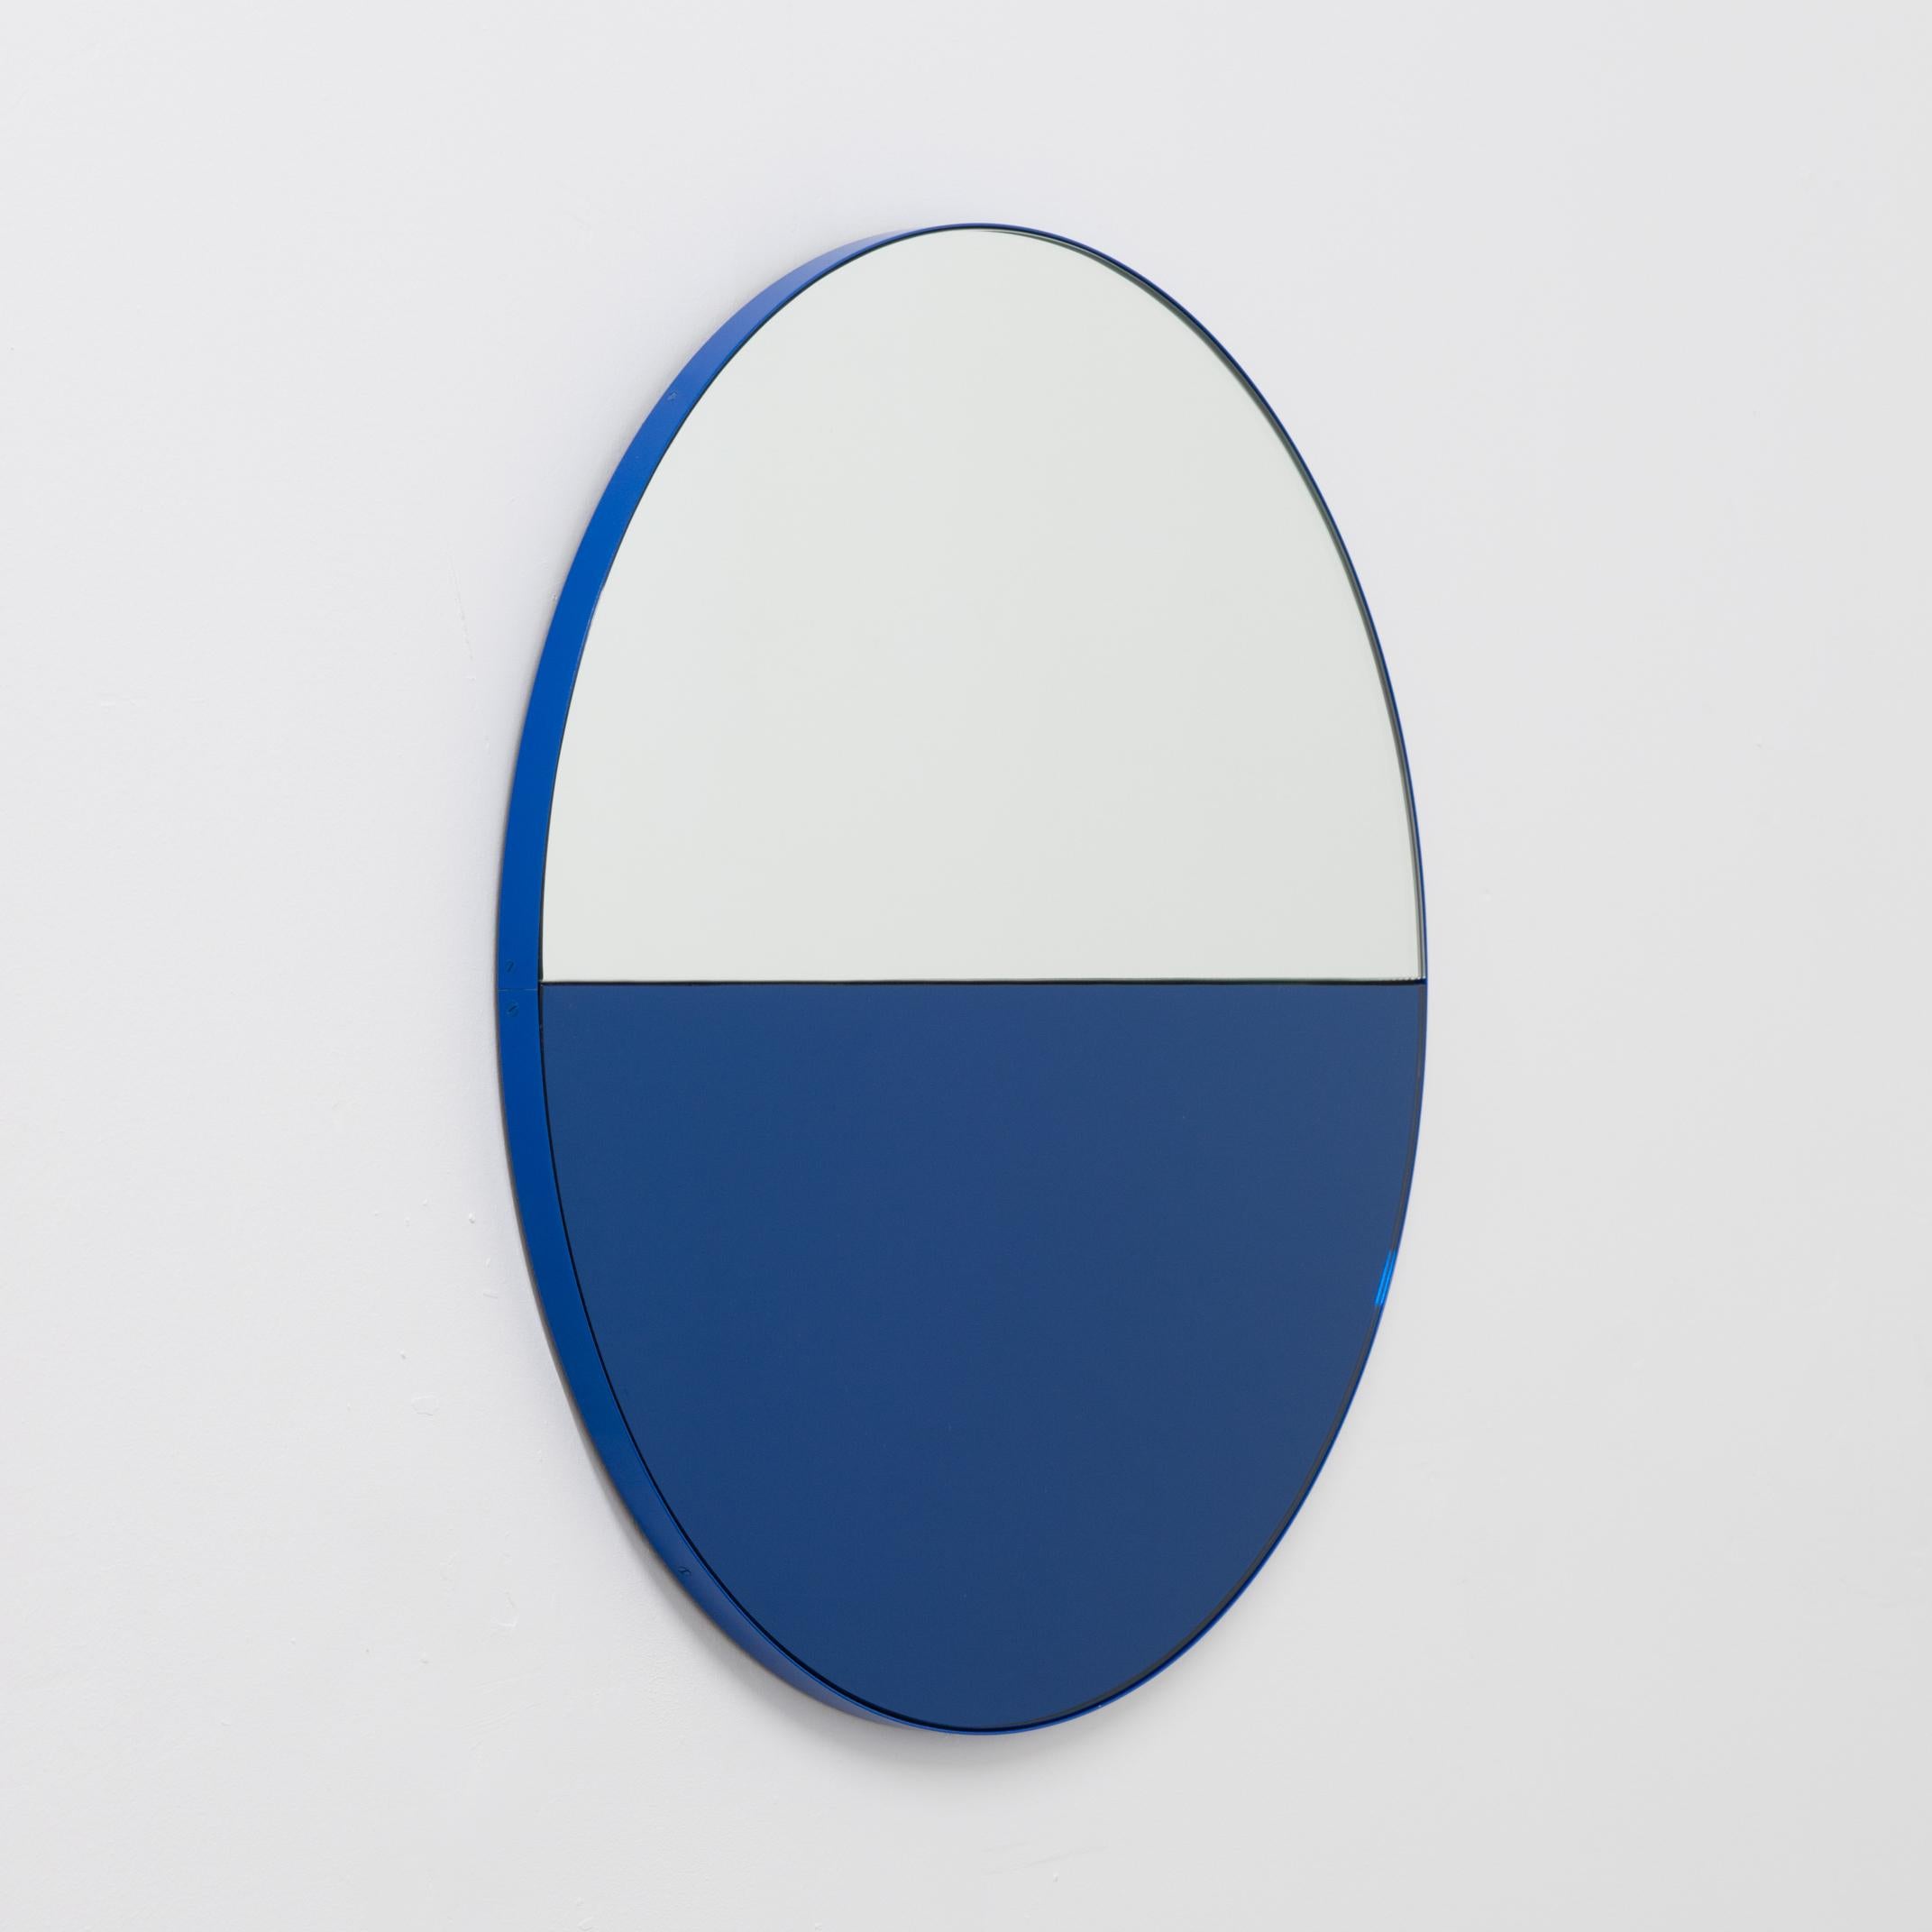 Contemporary In Stock Orbis Dualis Blue and Silver Tint Round Mirror with Blue Frame, Medium For Sale